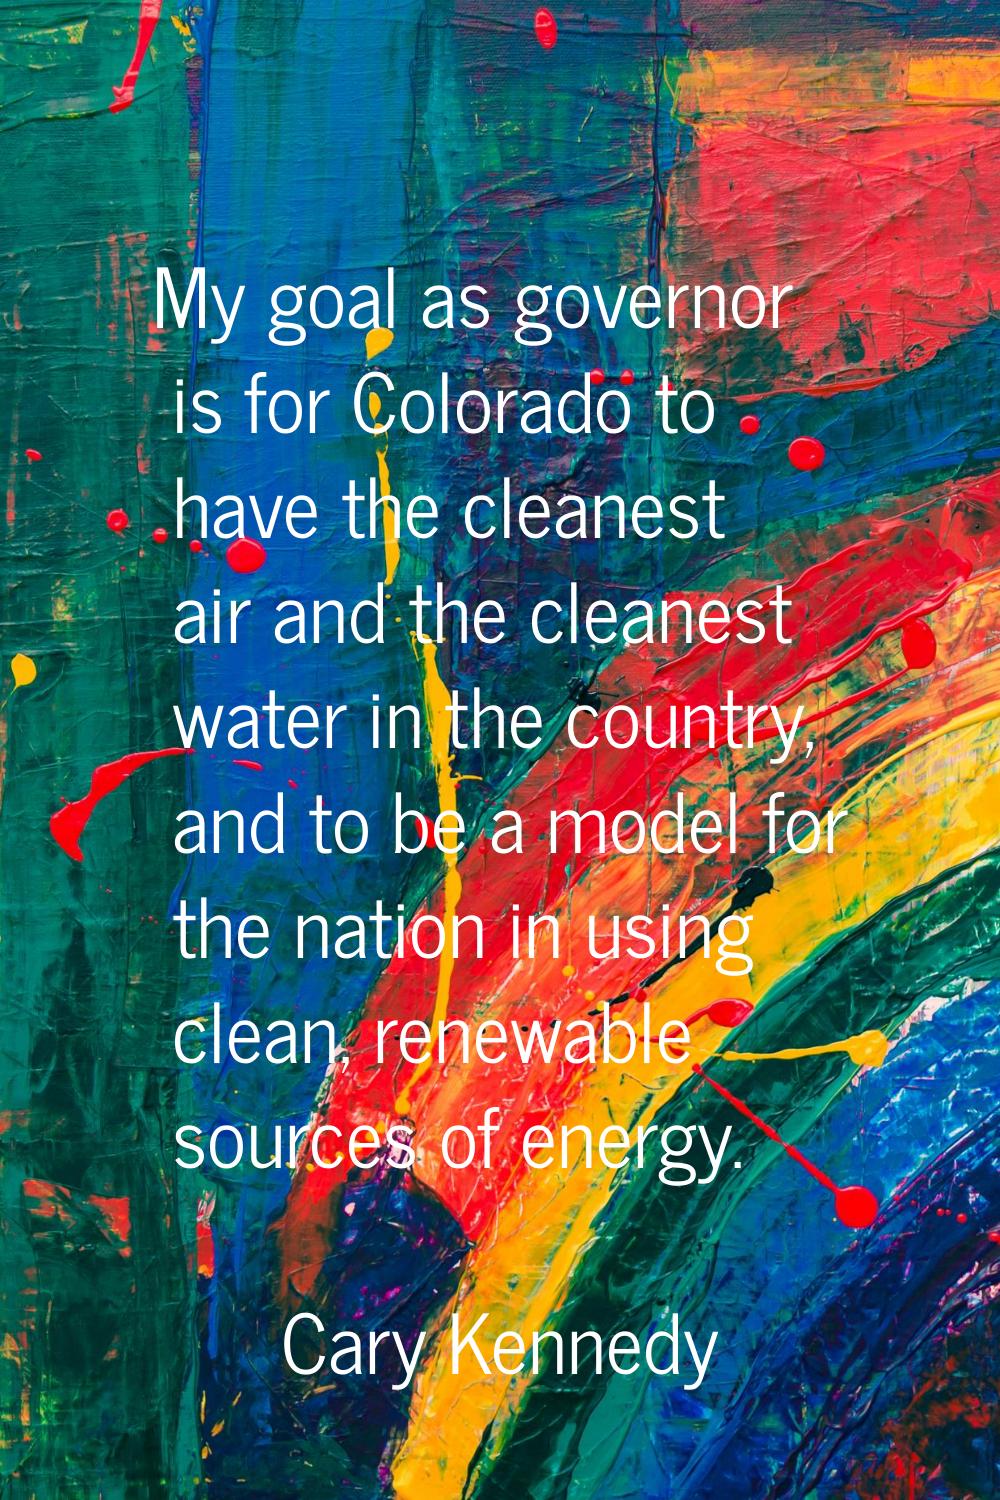 My goal as governor is for Colorado to have the cleanest air and the cleanest water in the country,